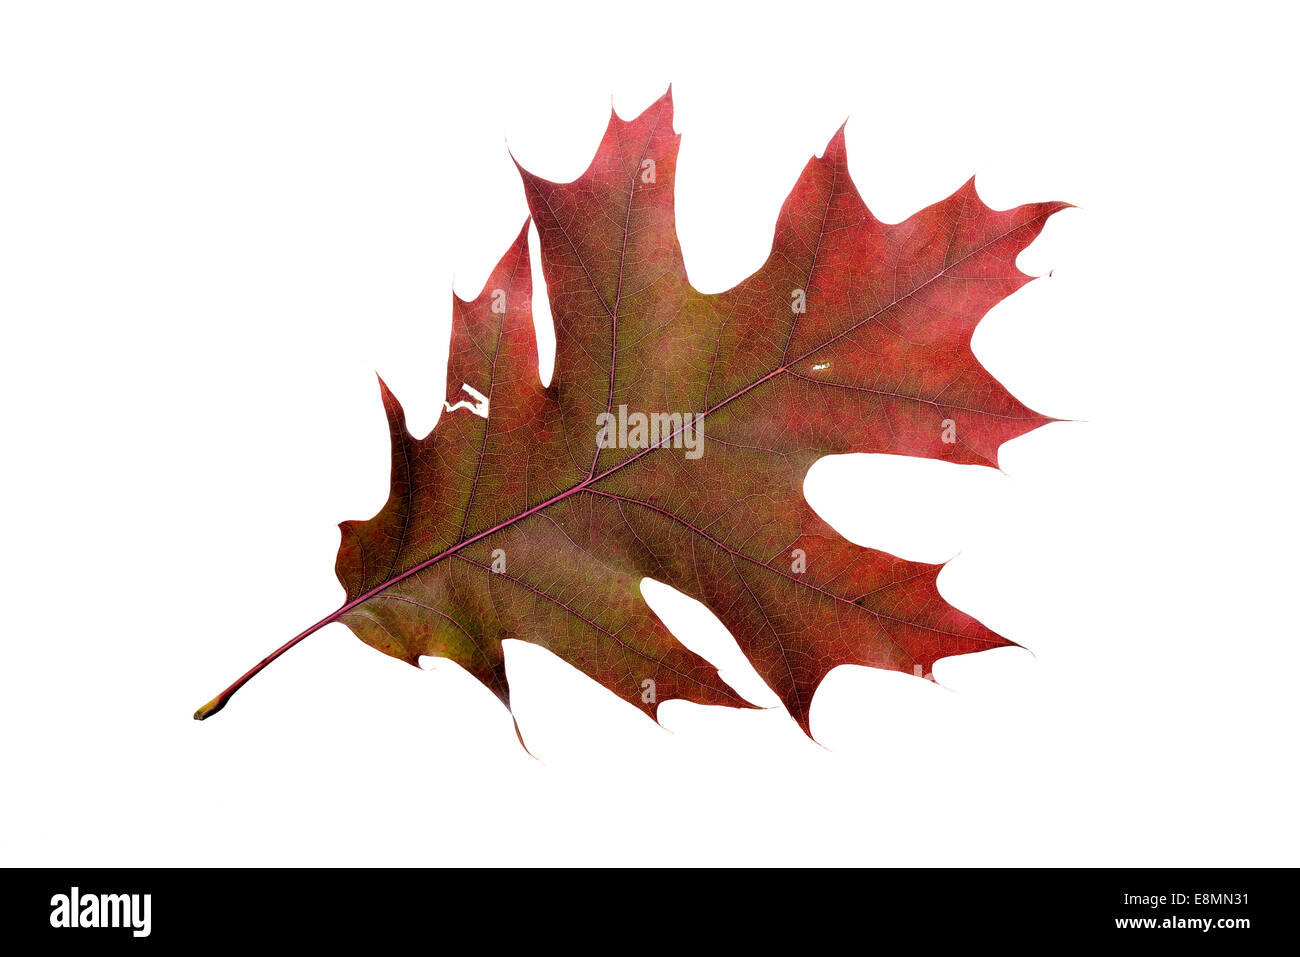 Oak tree leaf with autumn colors, isolated on white background Stock Photo